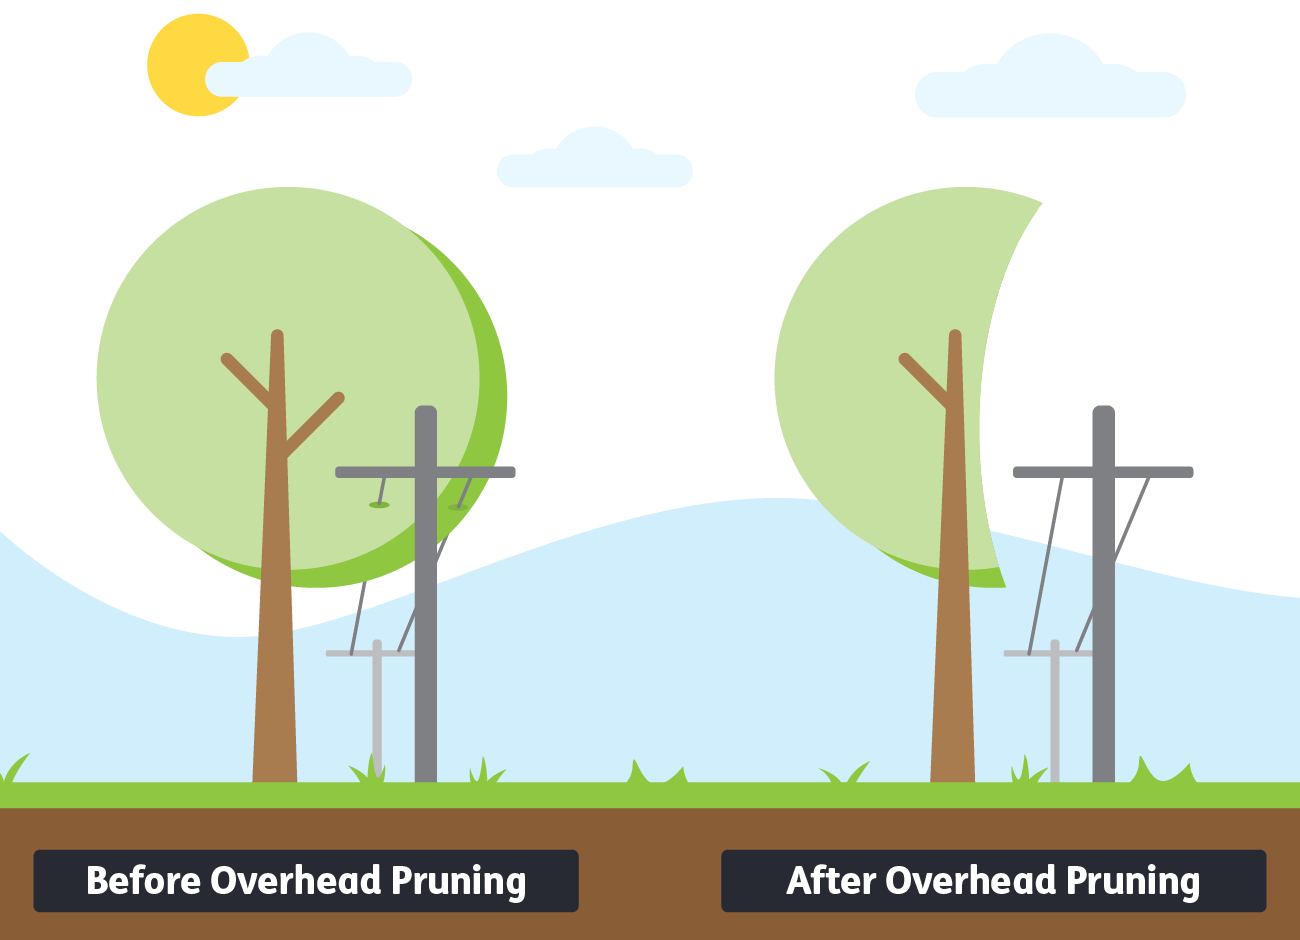 Graphic depicting overhead pruning technique